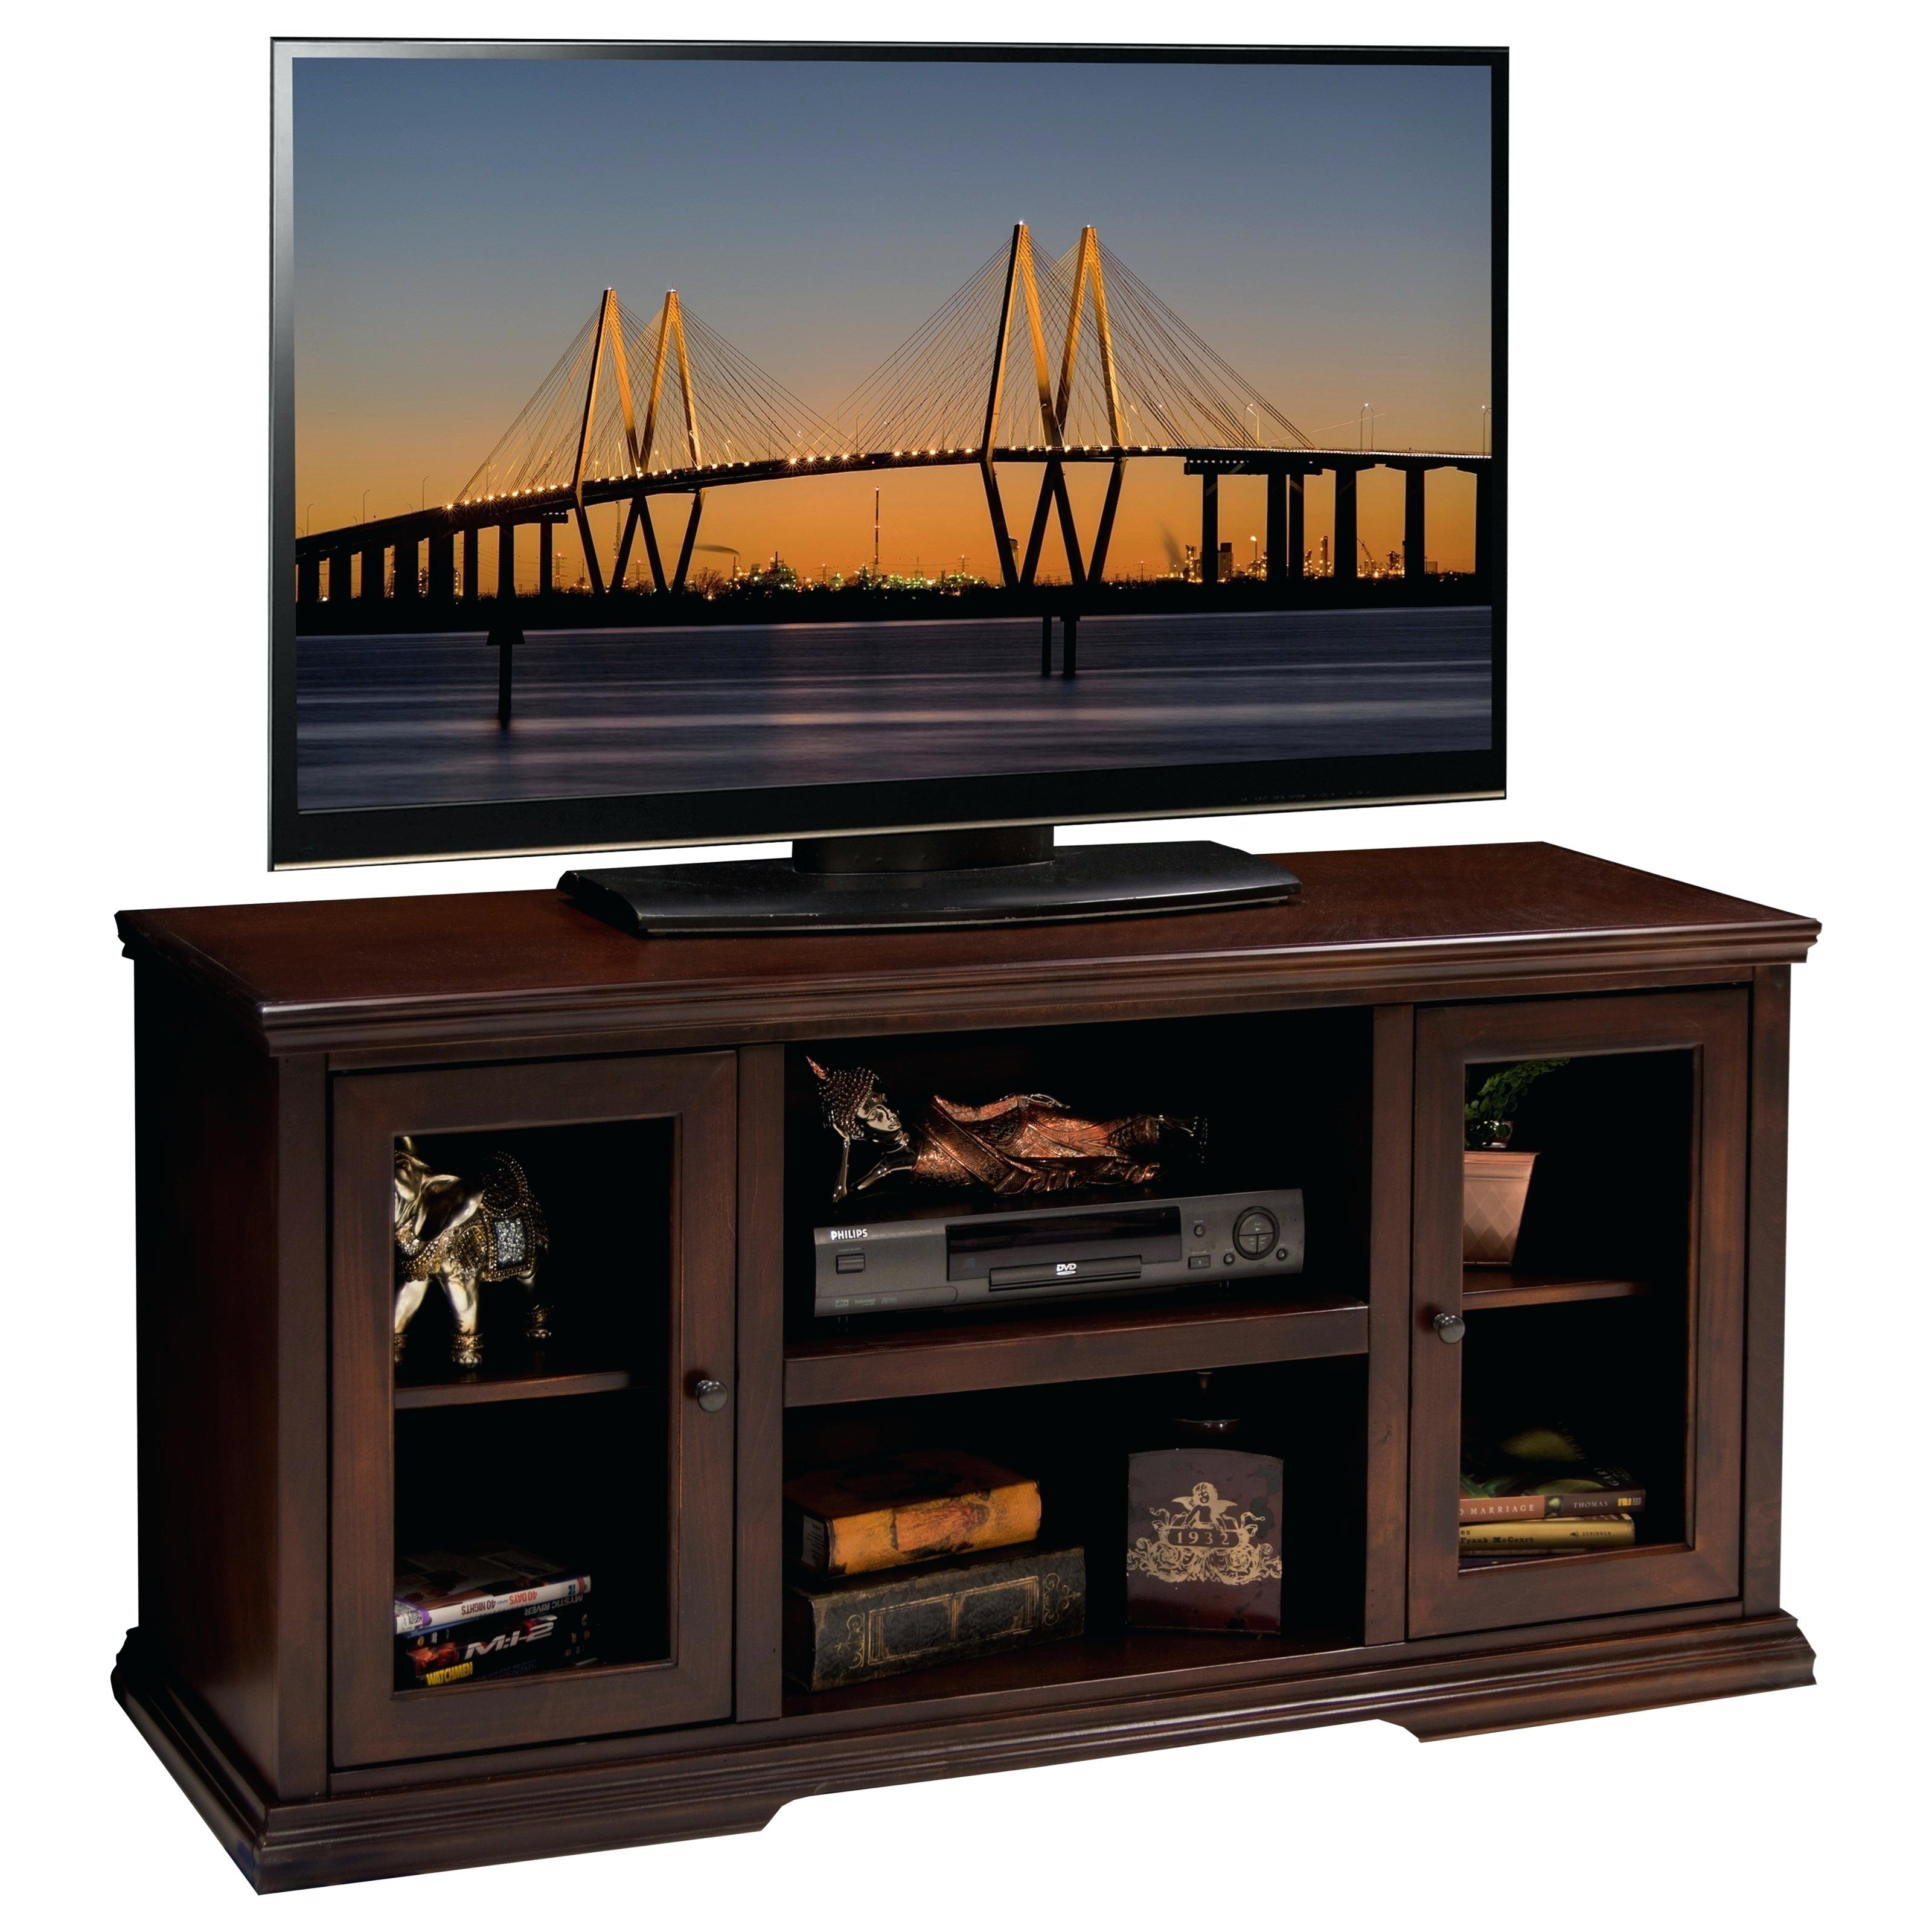 Sliding Barn Door Fireplace Tv Stand Luxury 54 Inch Tv Stand Umber byas with Fireplace Lauren Callowhill